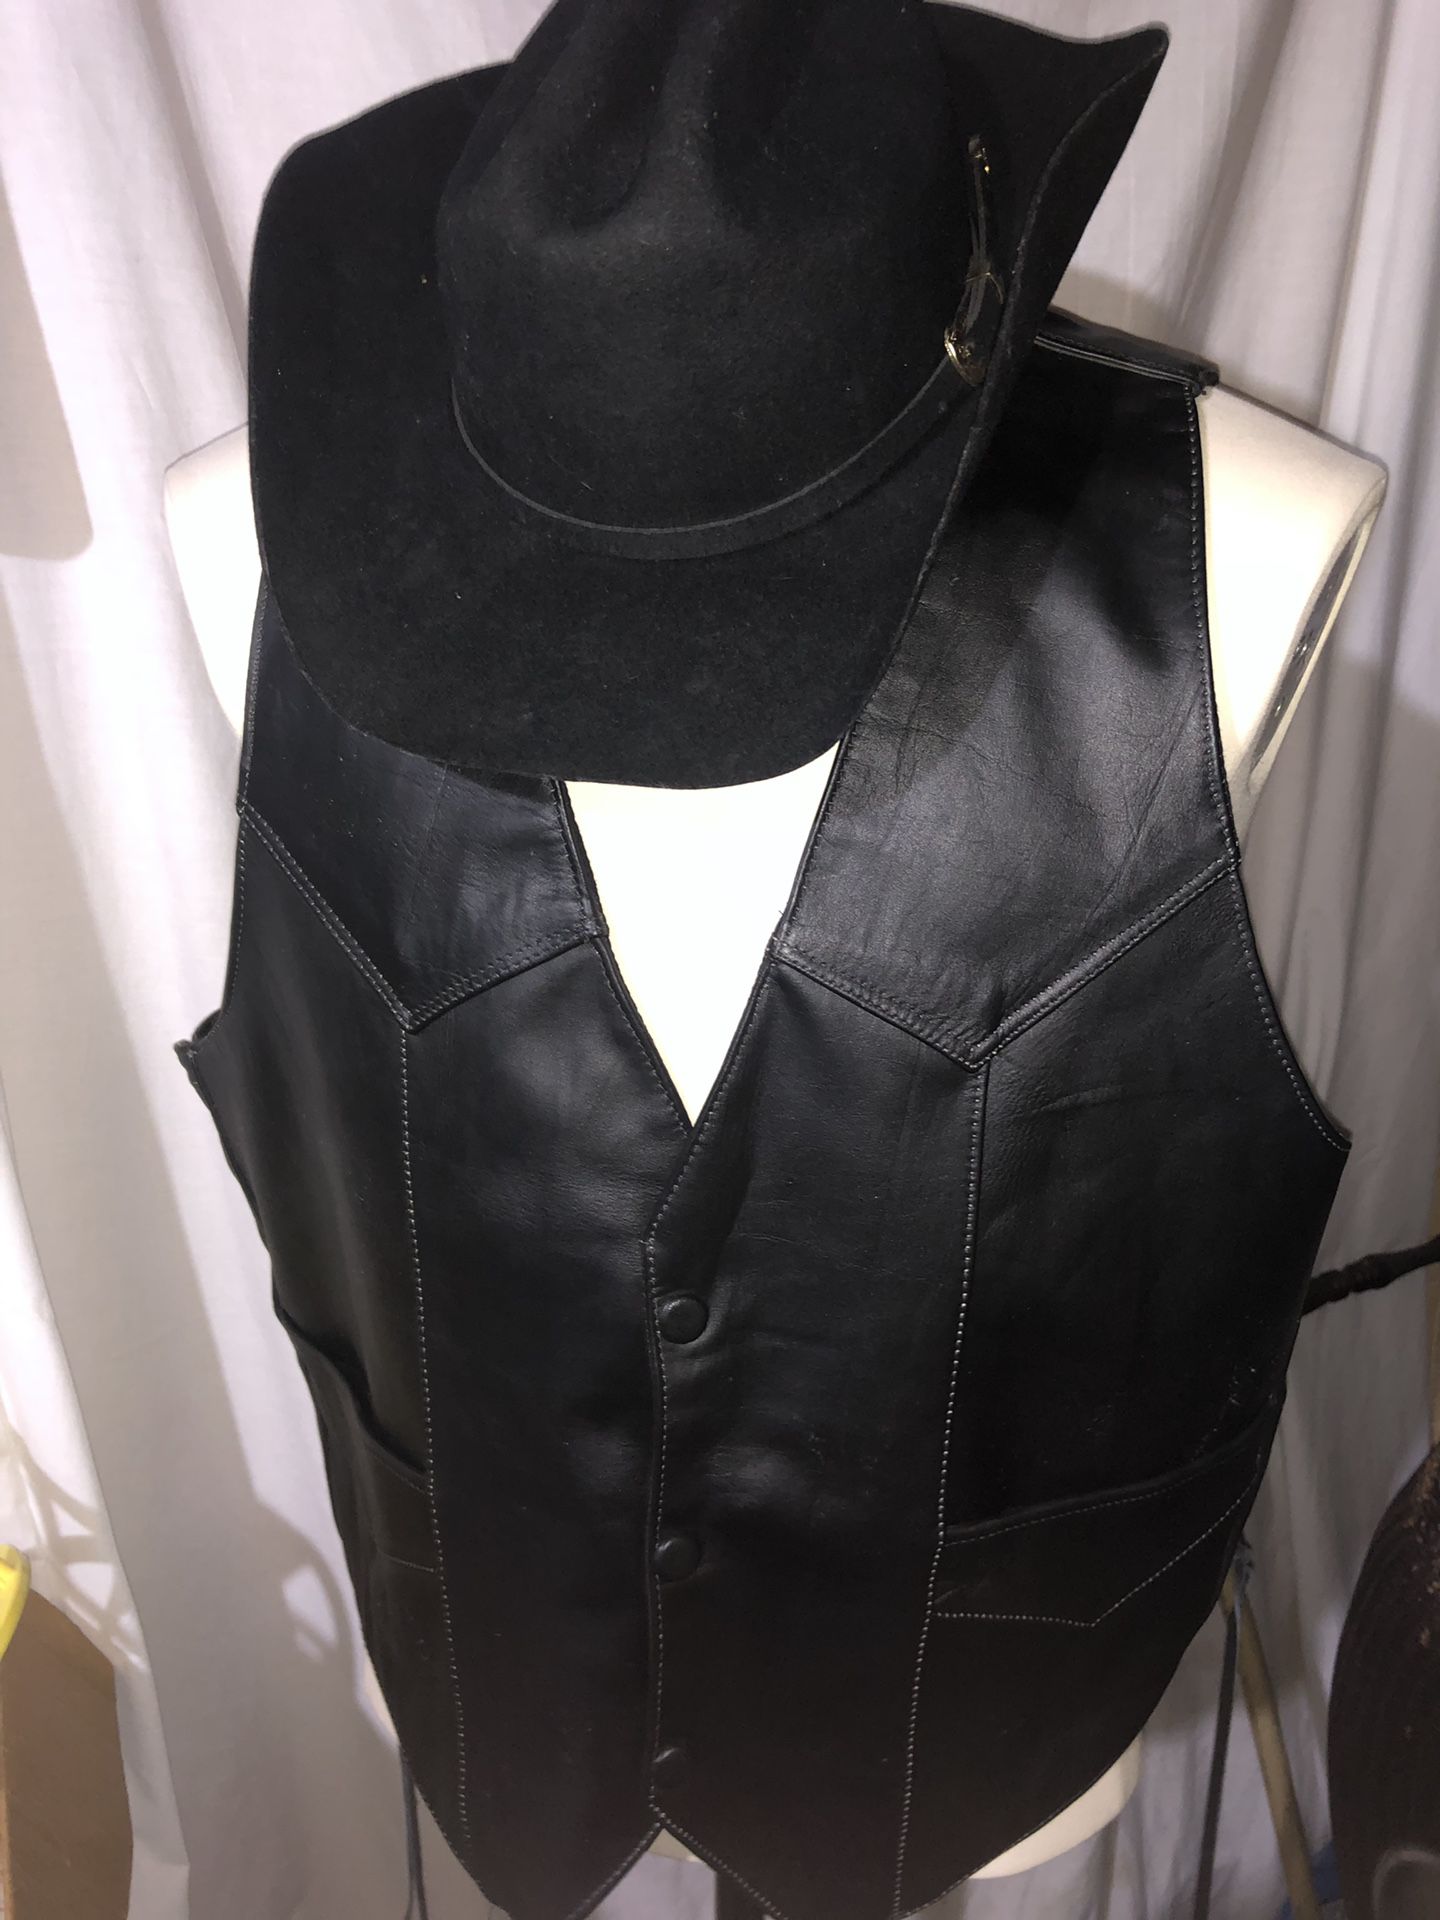 Leather vest with tassels size XL el general hat size 6 7/8